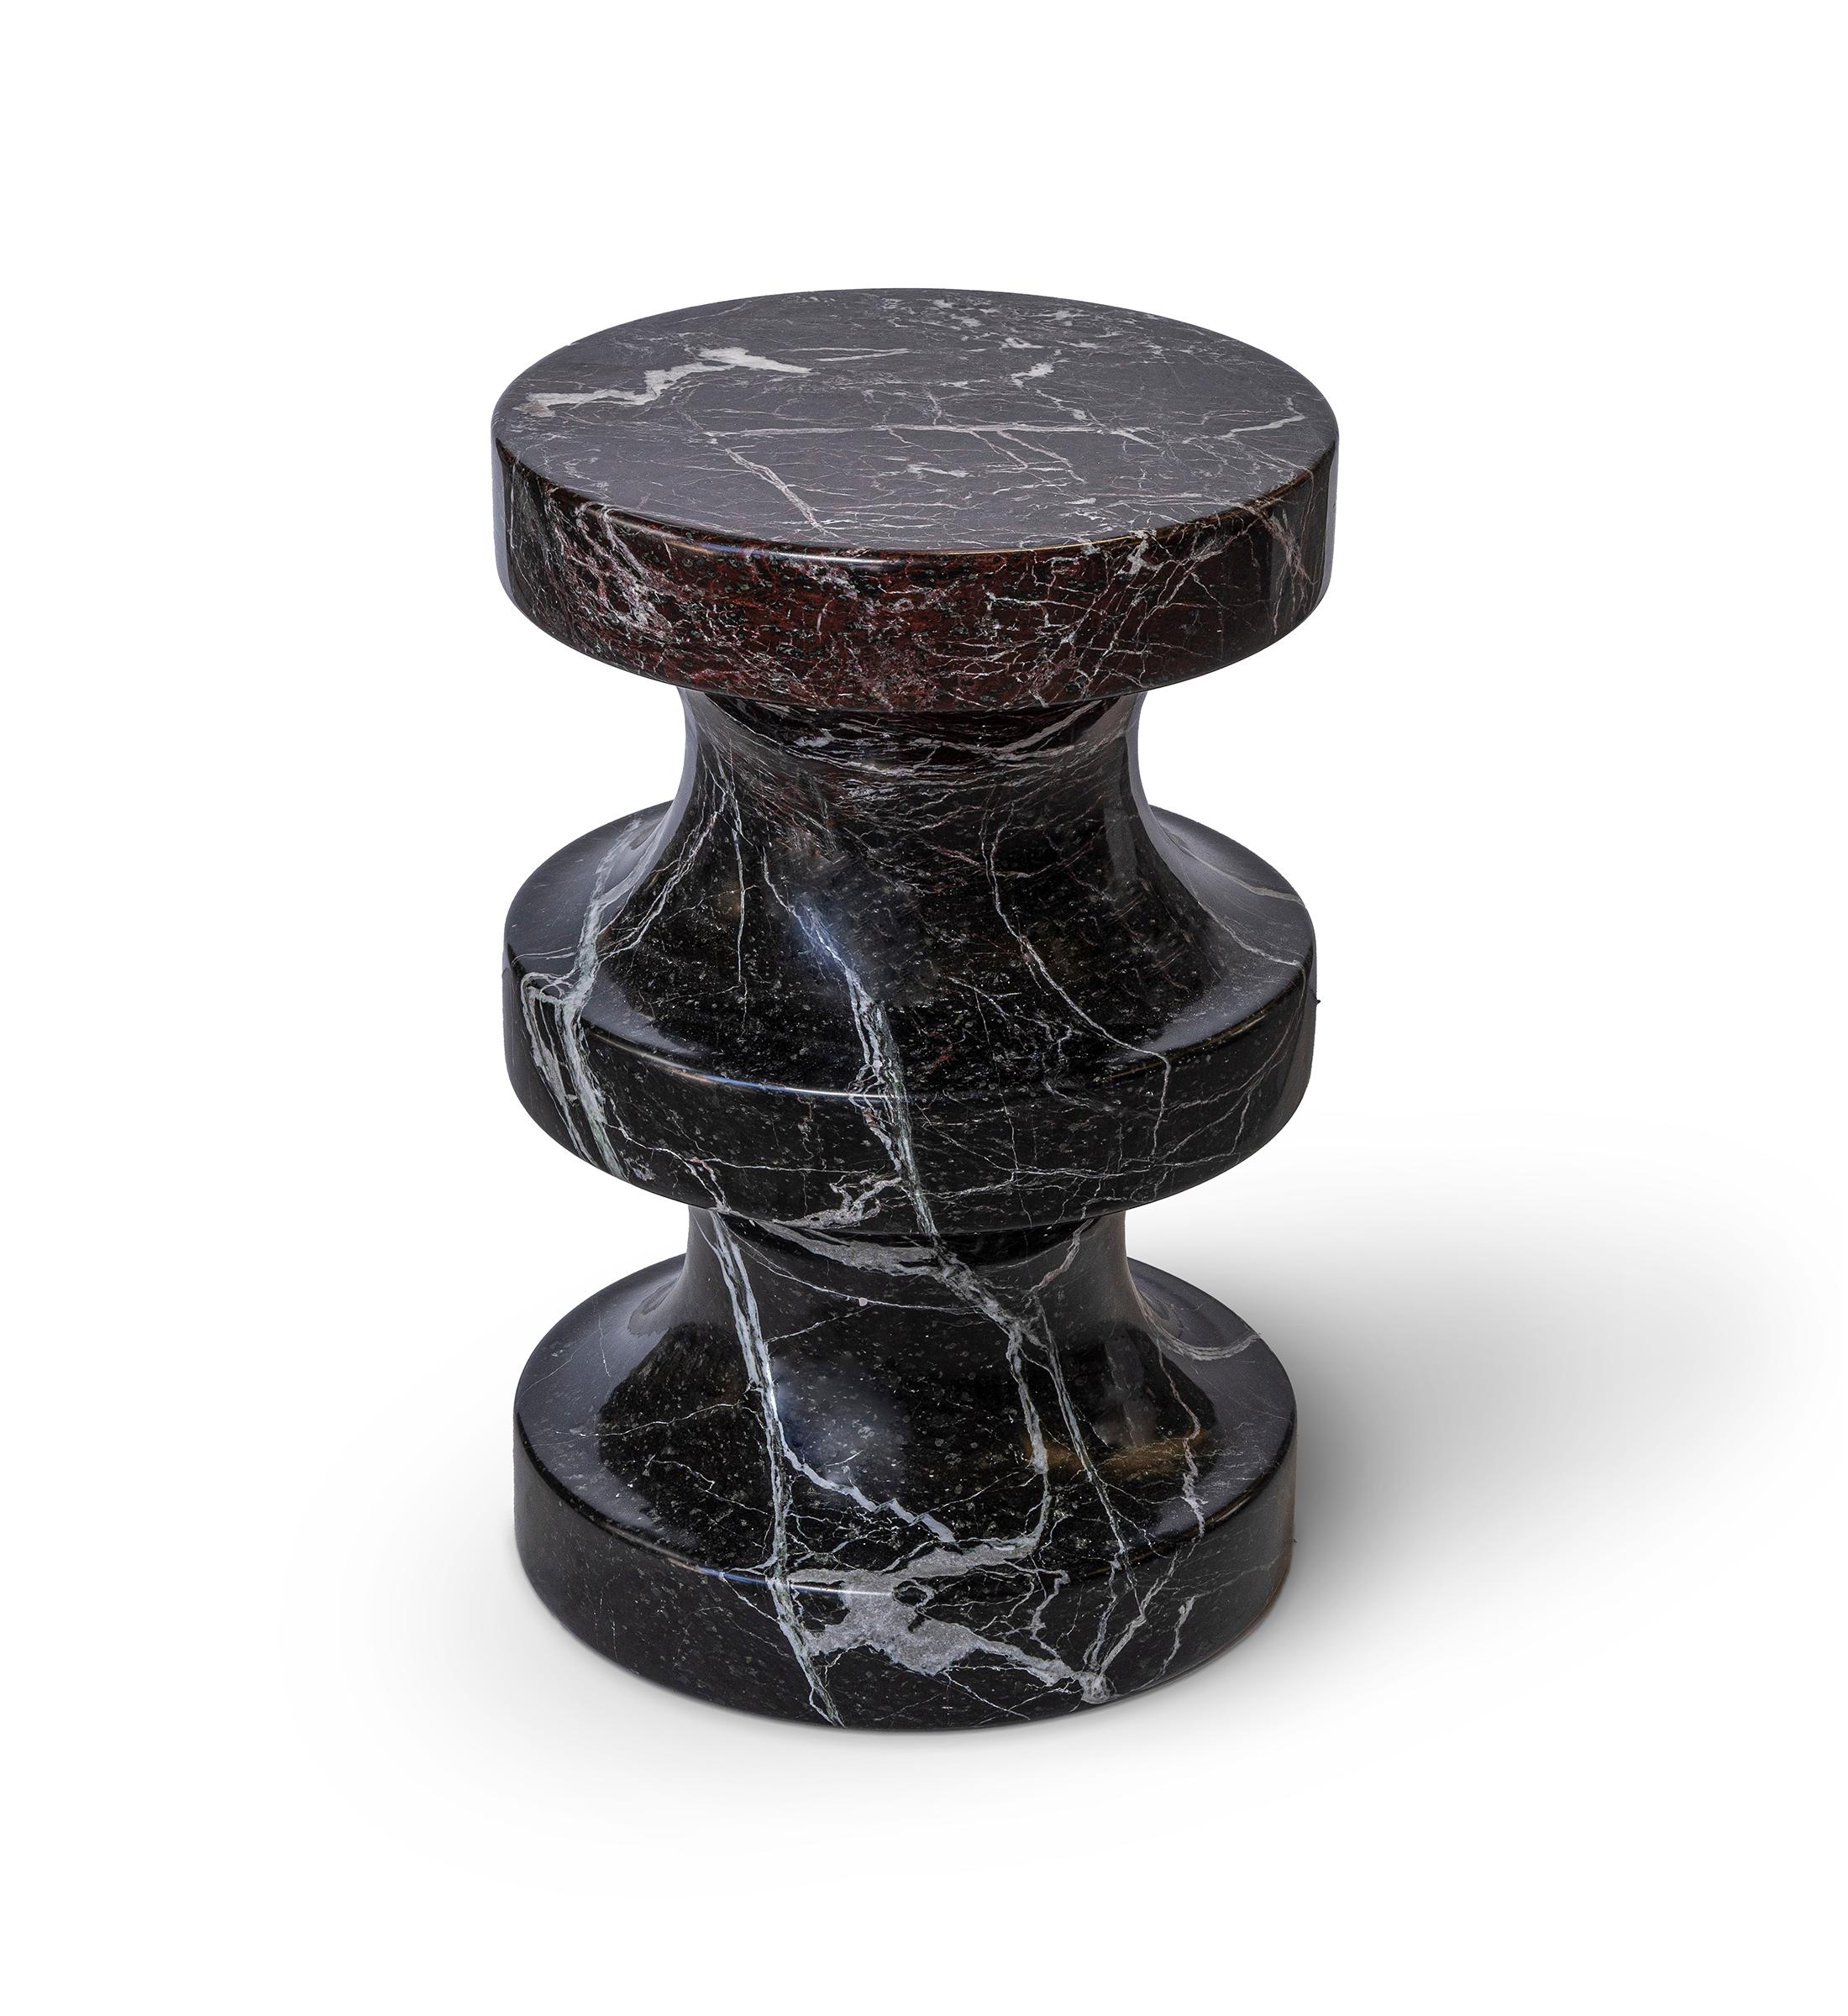 Pawn 3 Rosso Levanto Marble Side Table & Stool by Etamorph
Dimensions: Ø 30 x H 40 cm.
Materials: Rosso Levanto Marble

Available in different stone options. Please contact us. 

ETAMORPH is a NYC-based design boutique studio specializing in